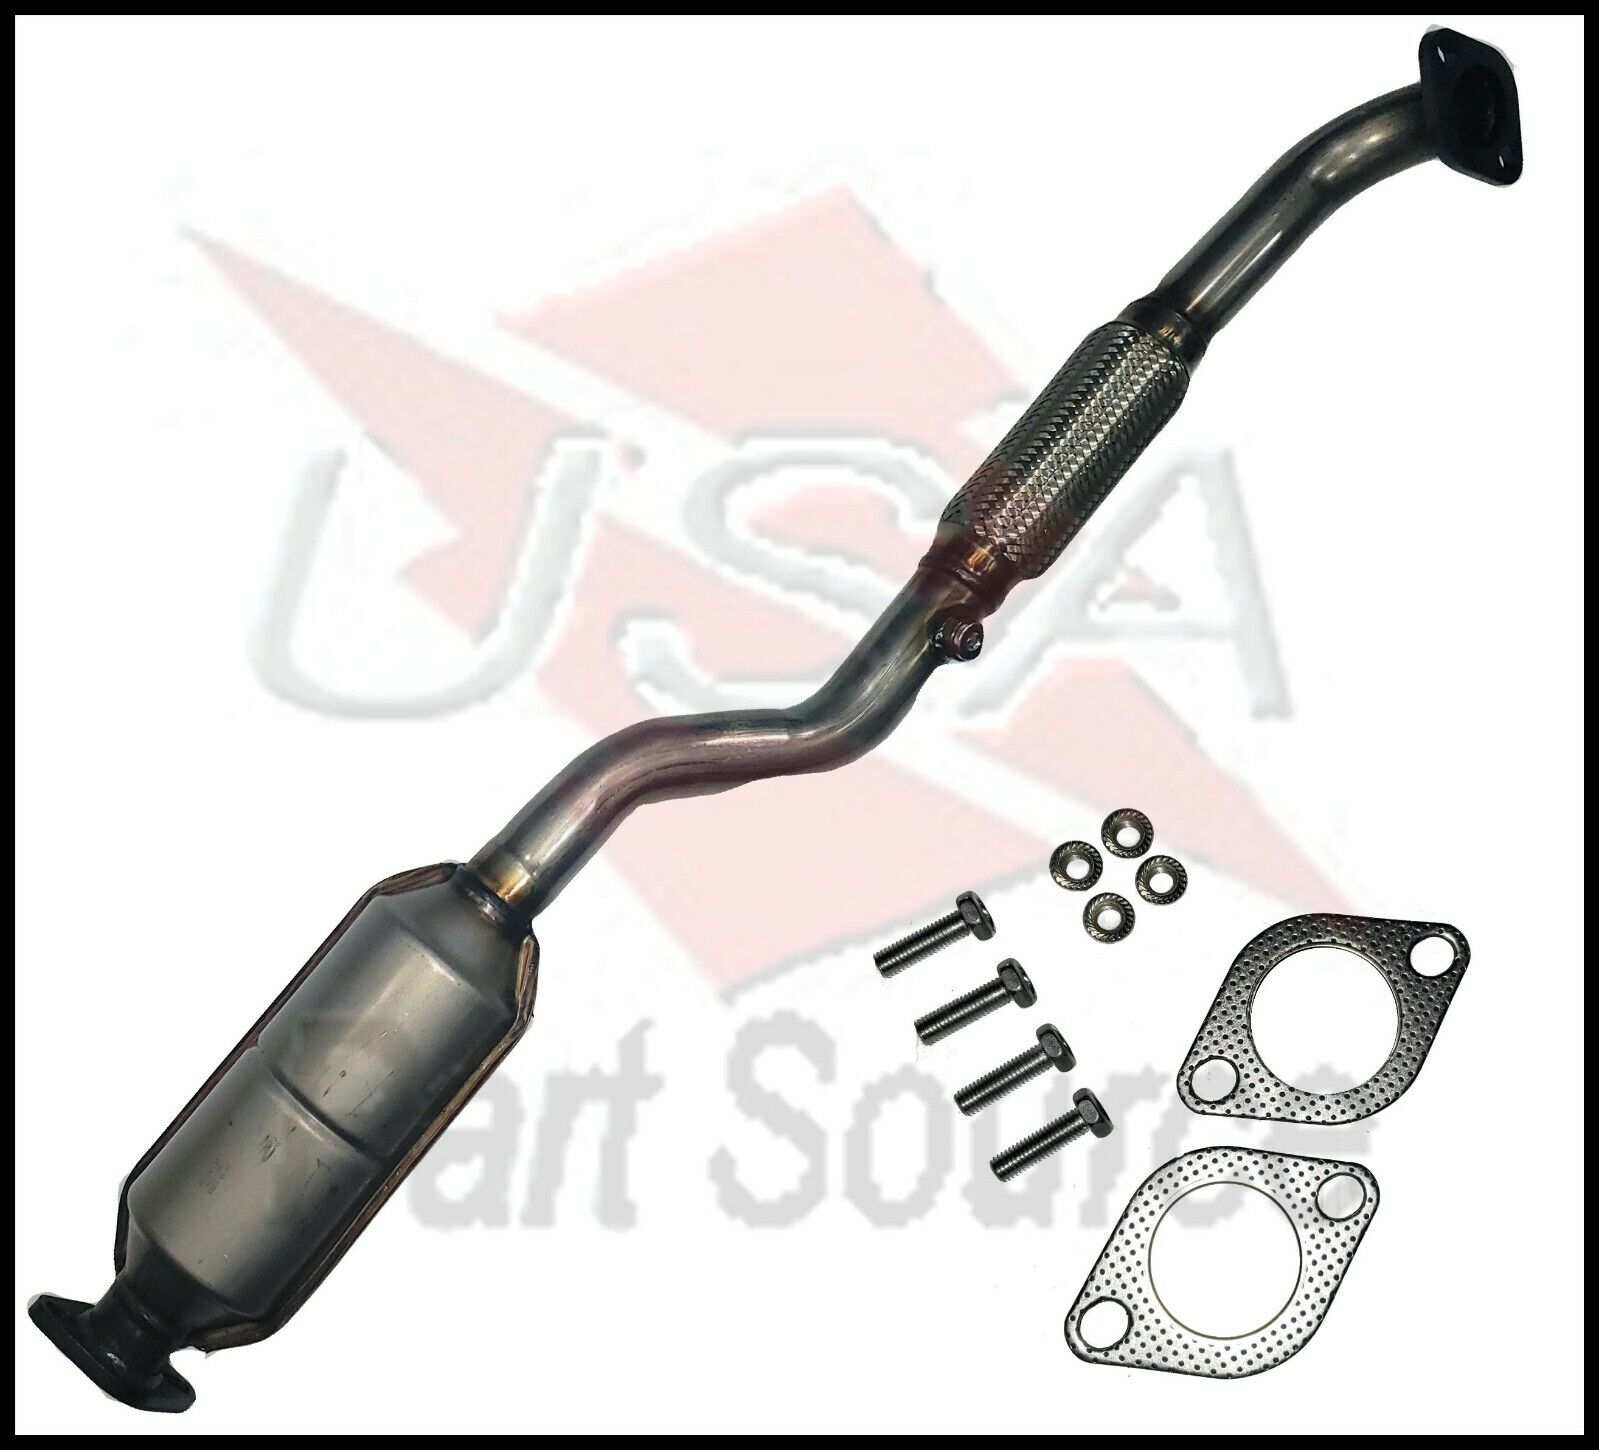 New Catalytic Converter With Flex Pipe For 2004-2006 Hyundai Elantra 2.0L 54774